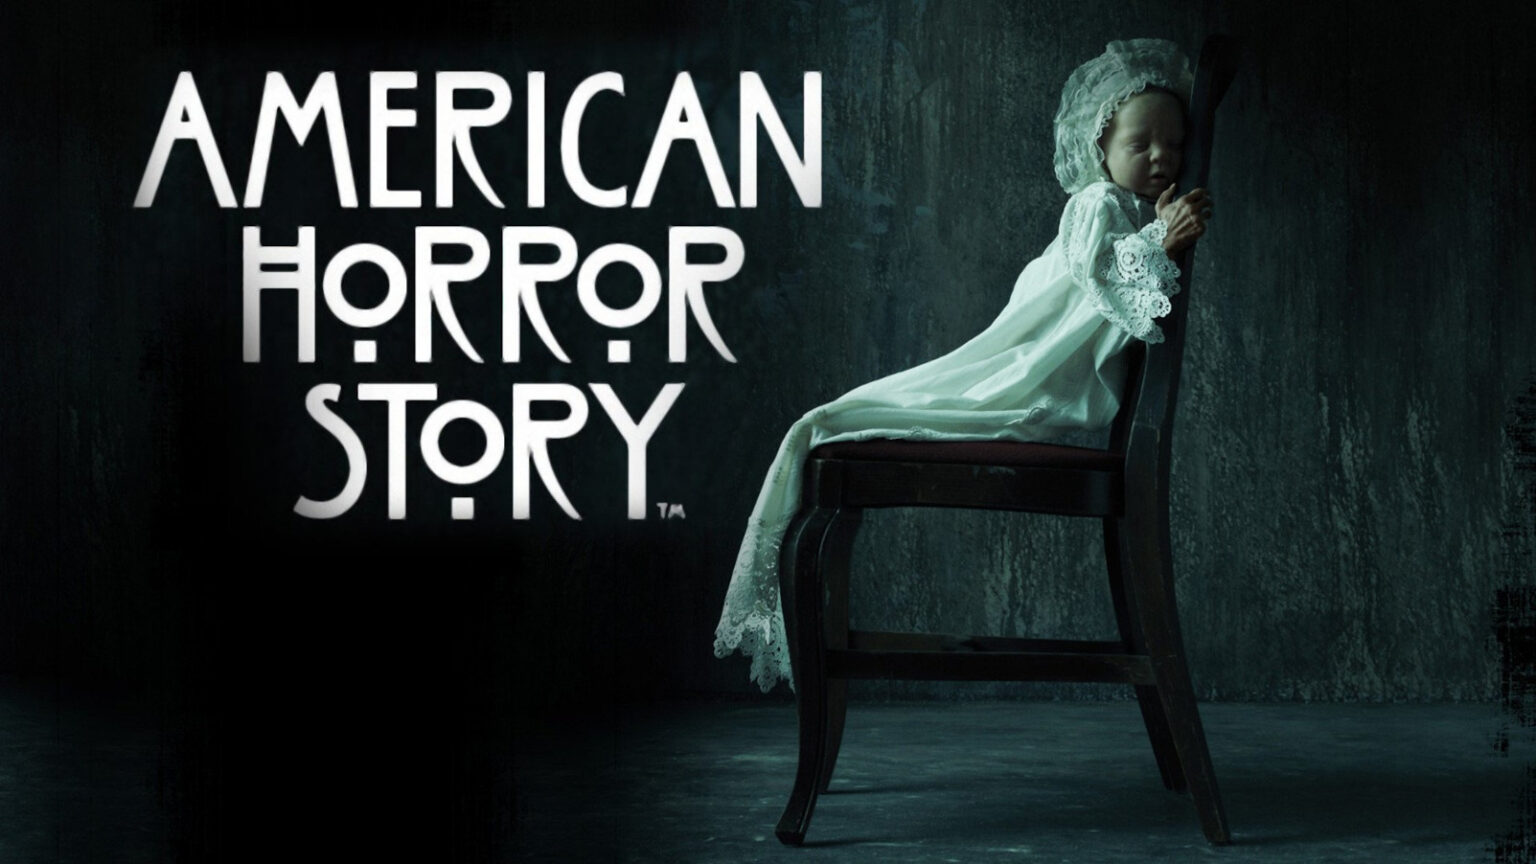 What’s going on with the new season of 'AHS'? Uncover these fascinating theories about 'American Horror Story' and its new season.